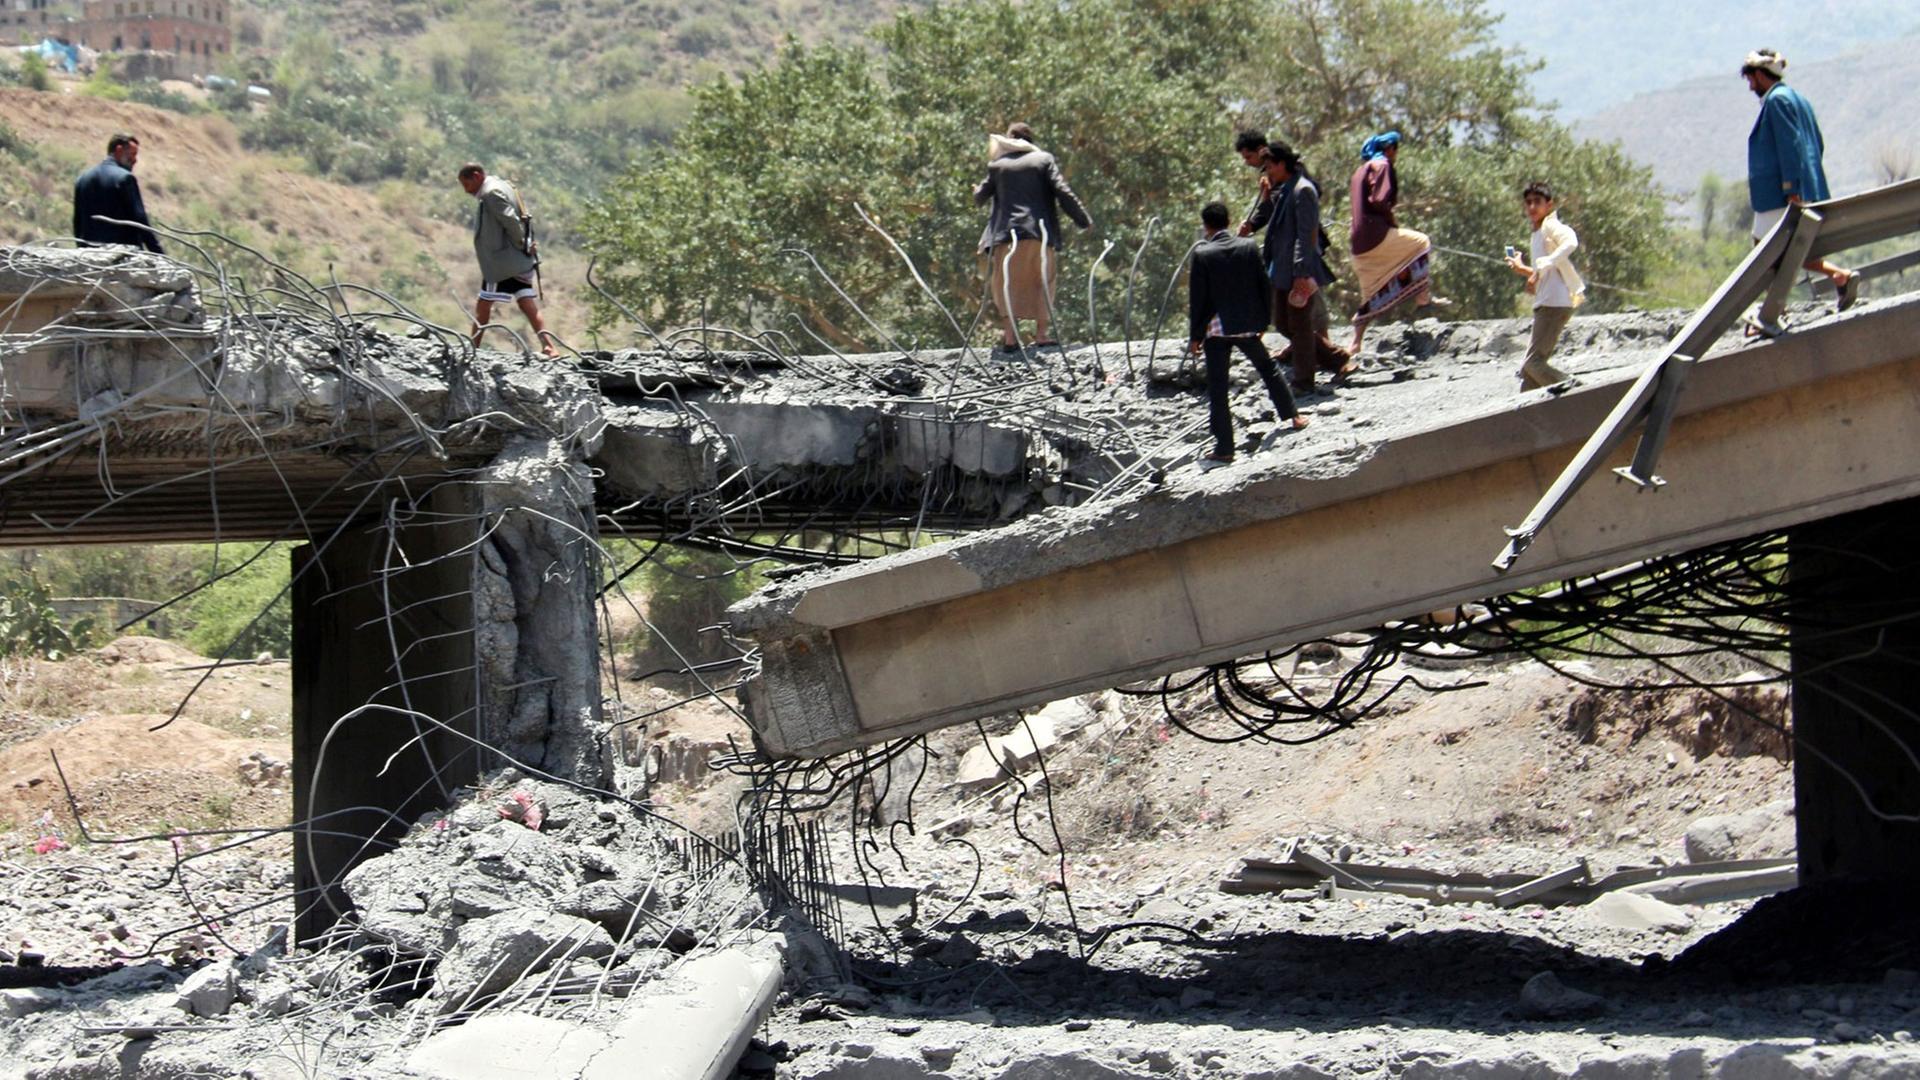 Yemenis stand on a bridge allegedly hit by an airstrike carried out by the Saudi-led coalition near the central city of Ibb, Yemen, 21 April 2015.